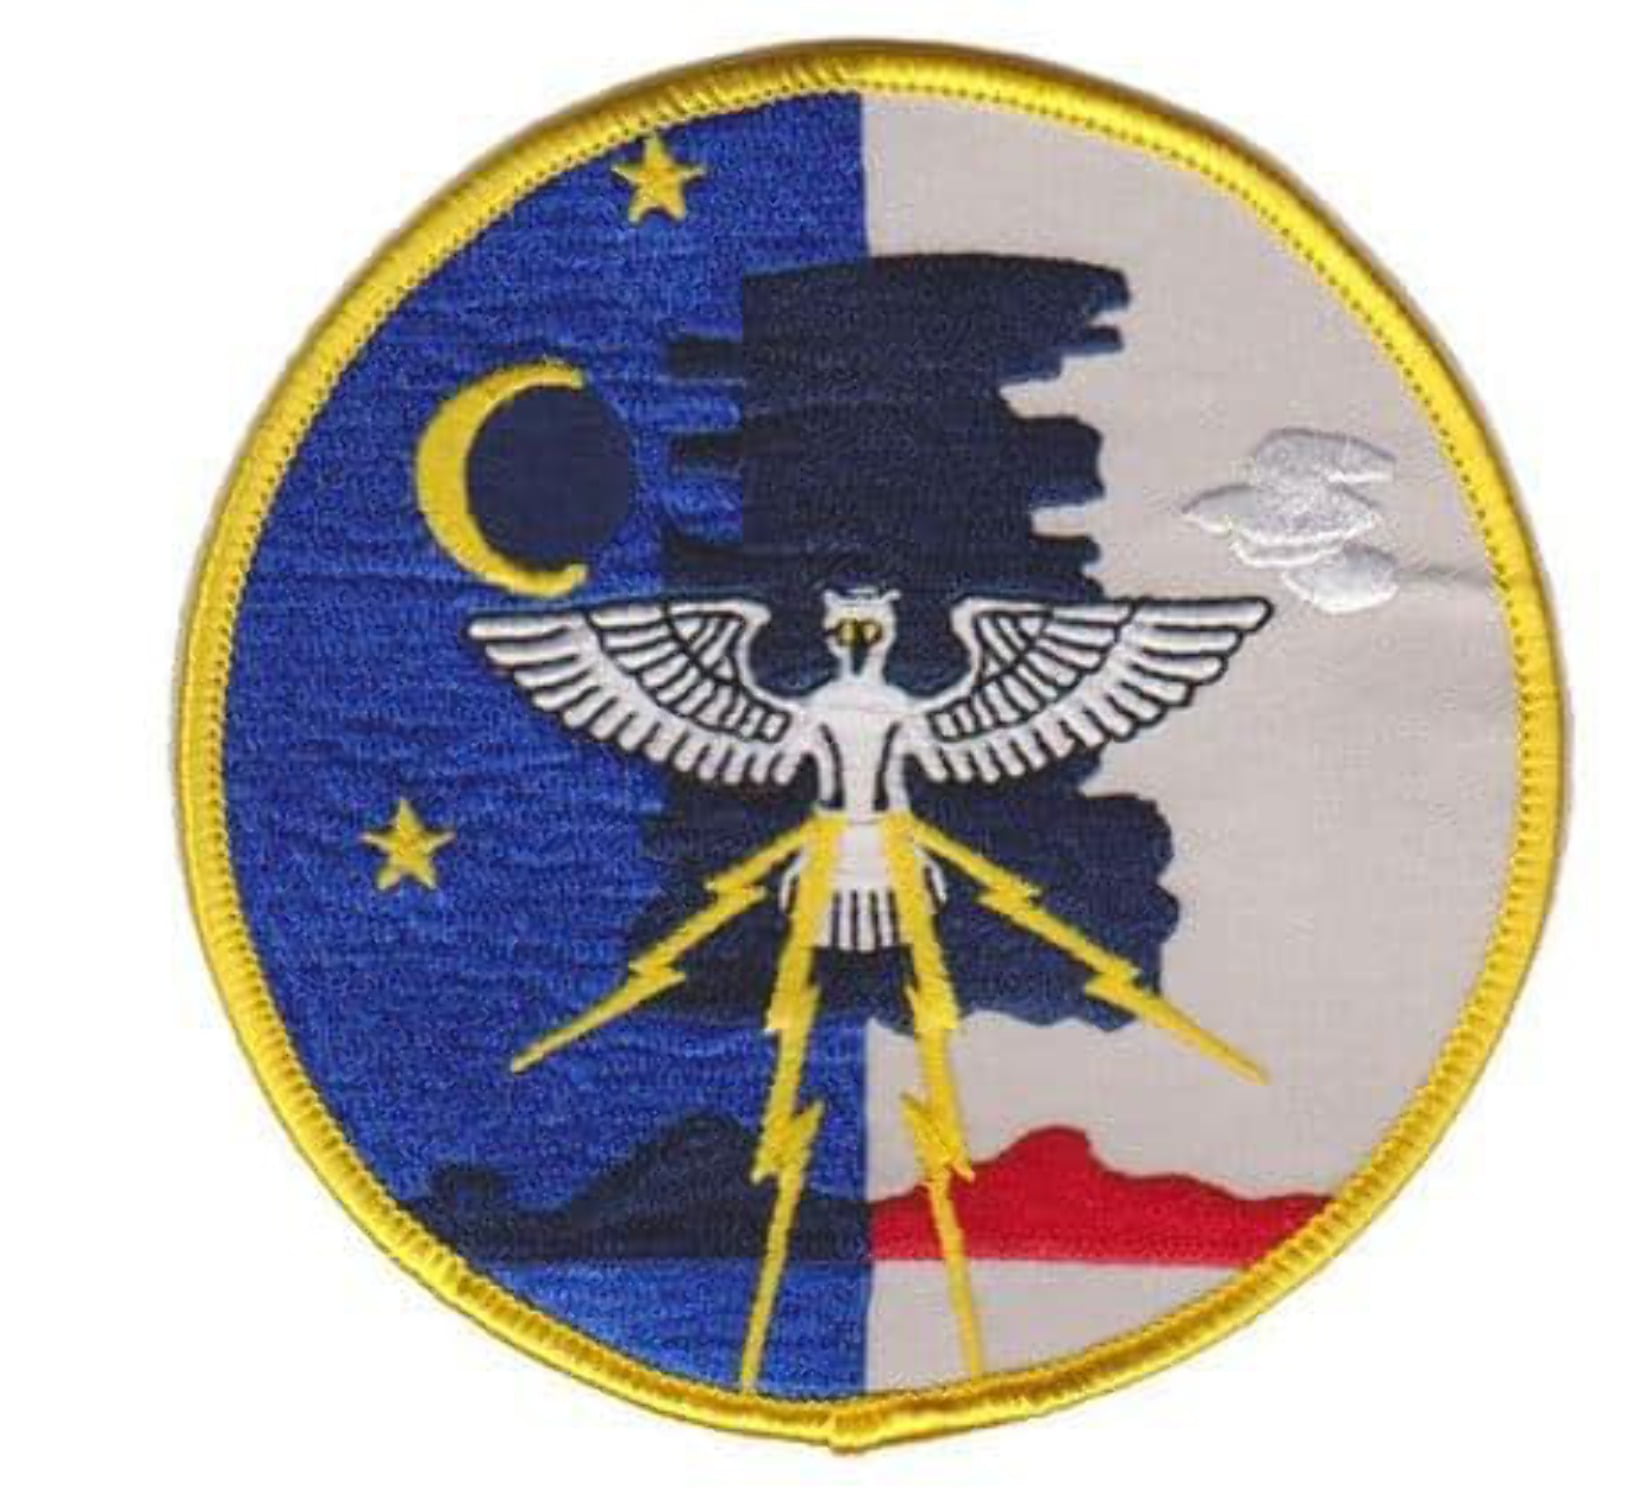 VMF-513 Flying Nightmares Patch – Sew On, 4 inch - Walmart.com